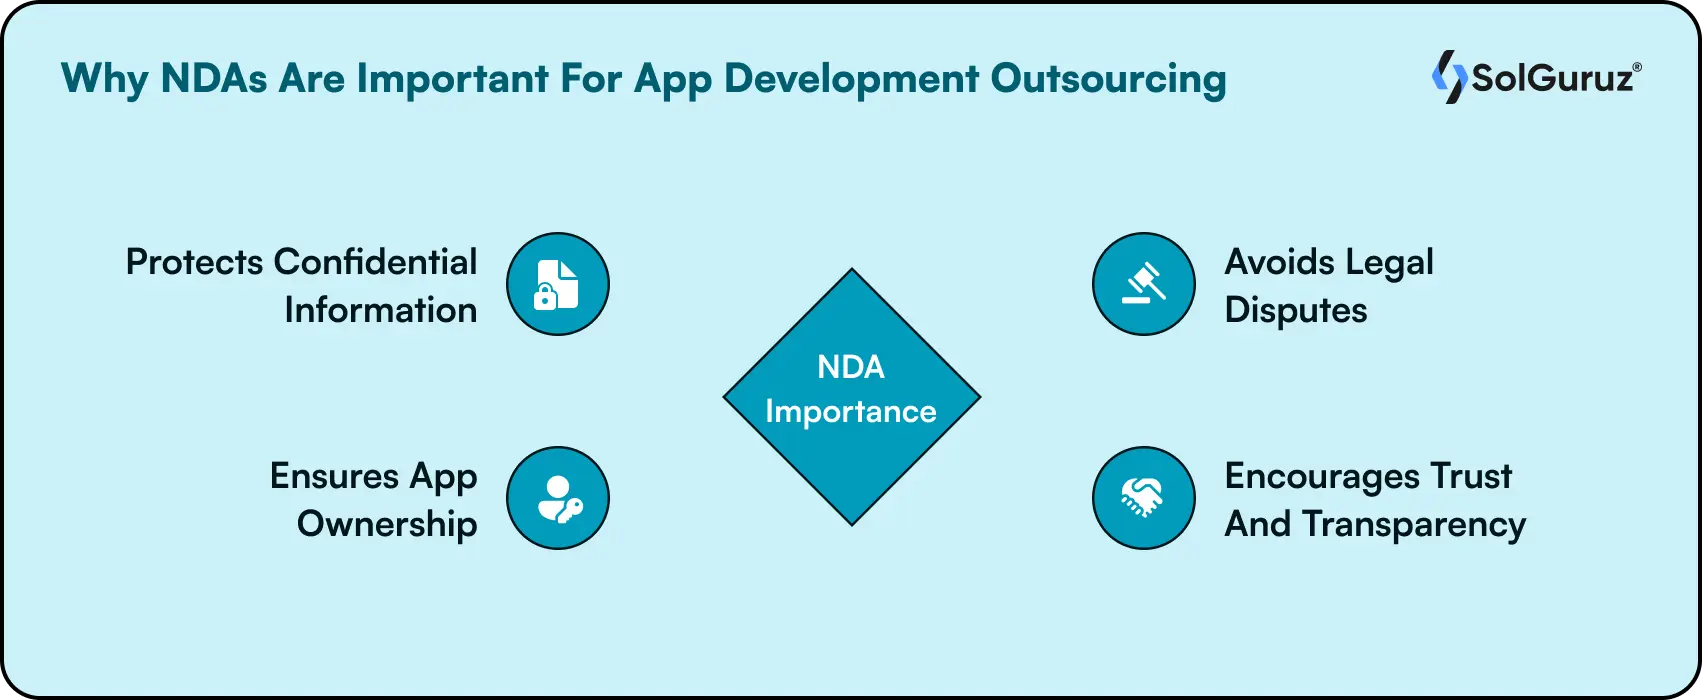 Why NDAs Are Important For App Development Outsourcing